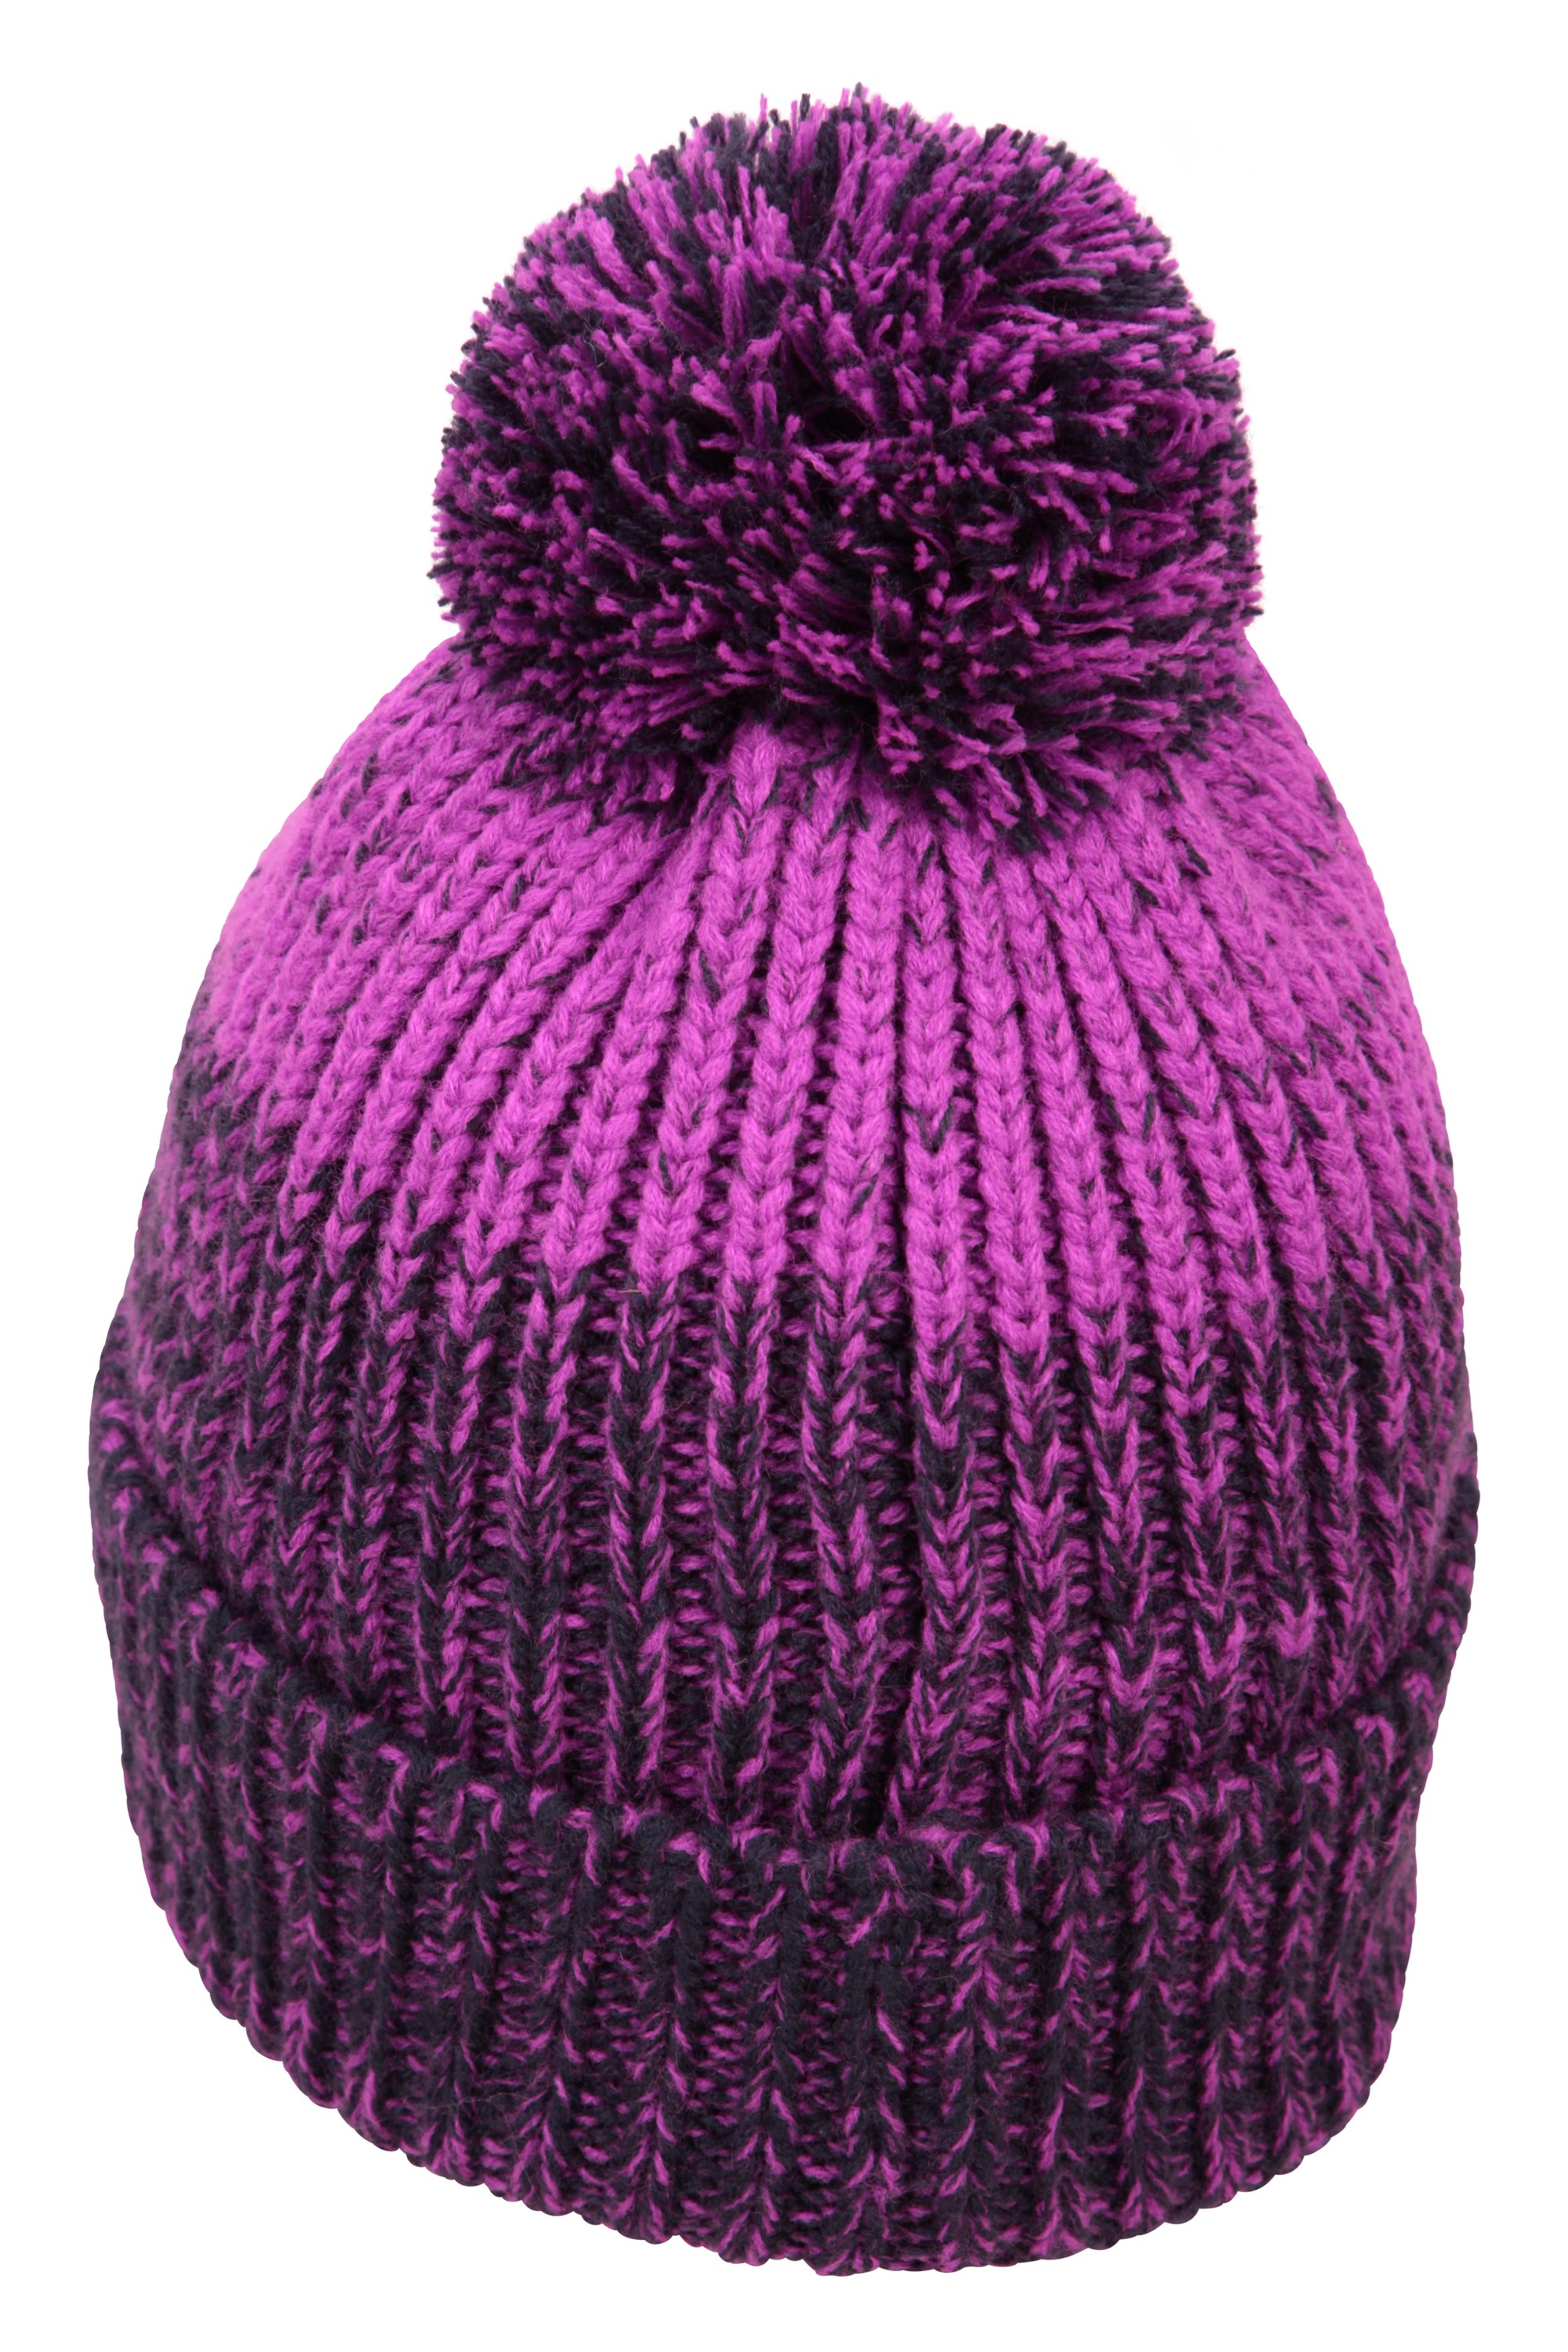 Mountain Warehouse Womens Bobble Hat with Ear Flaps & Long Tassels Ladies 